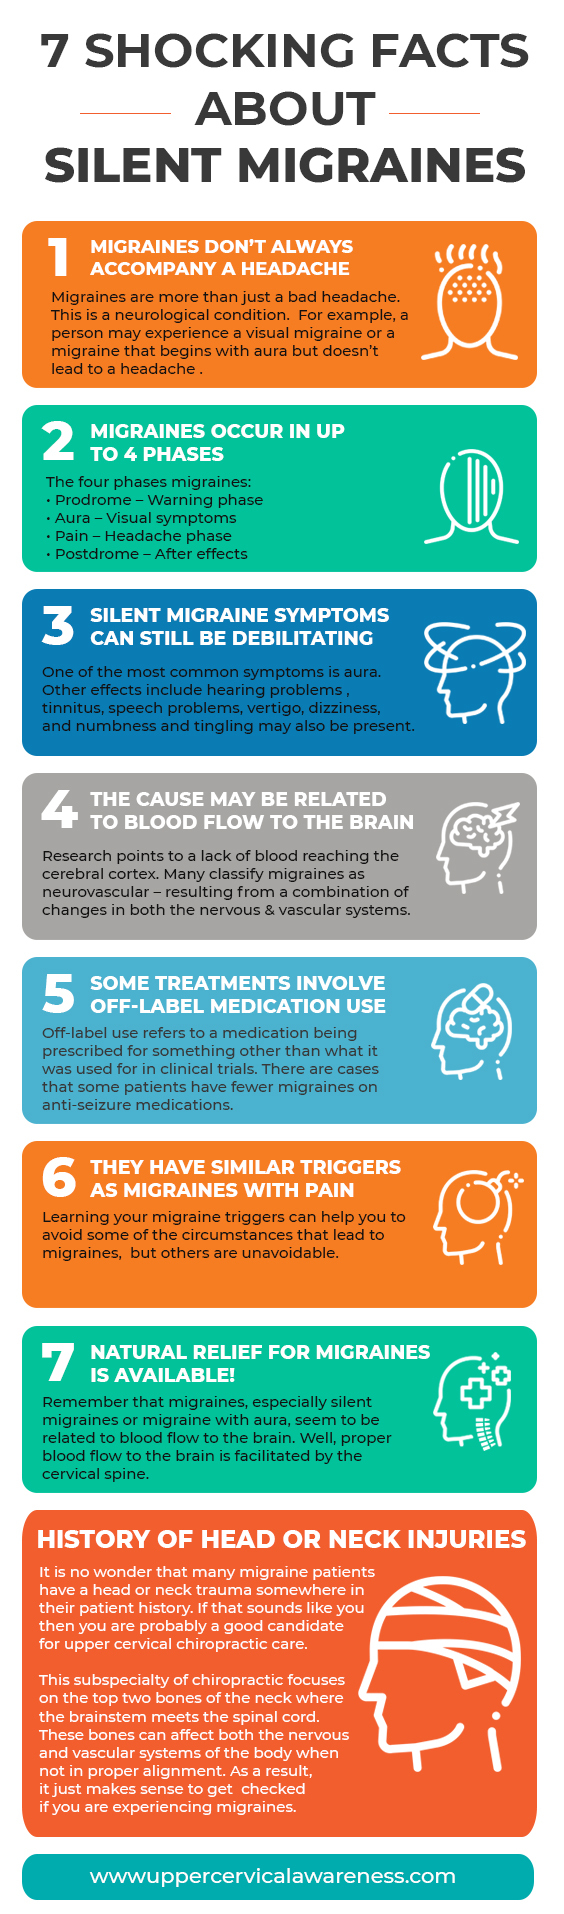 7 Shocking Facts About Silent Migraines